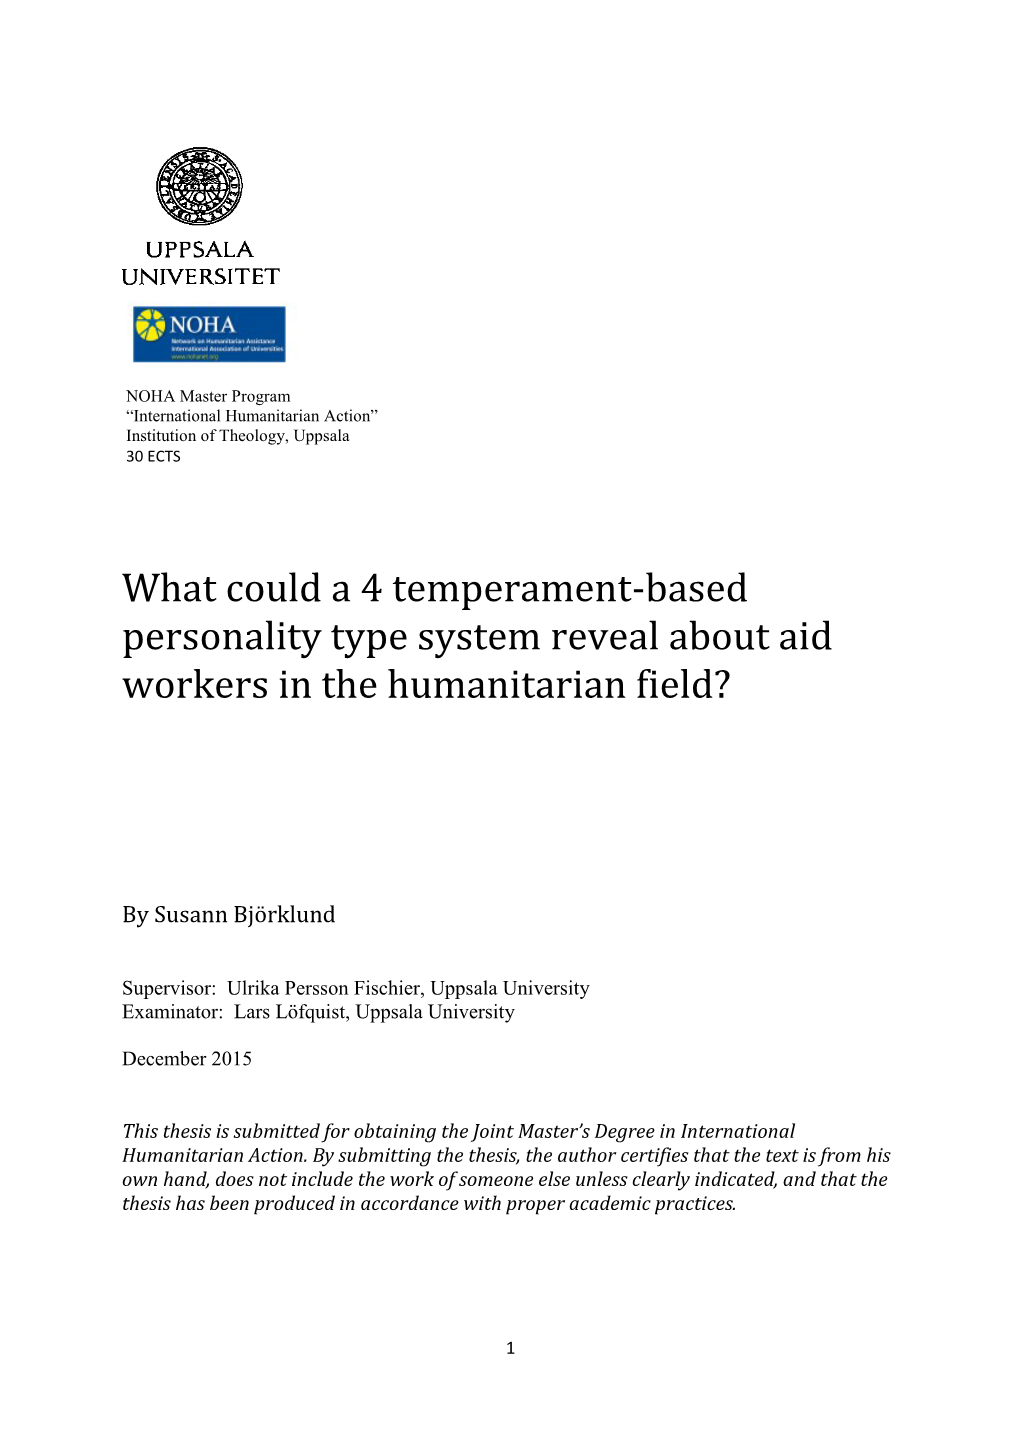 What Could a 4 Temperament-Based Personality Type System Reveal About Aid Workers in the Humanitarian Field?